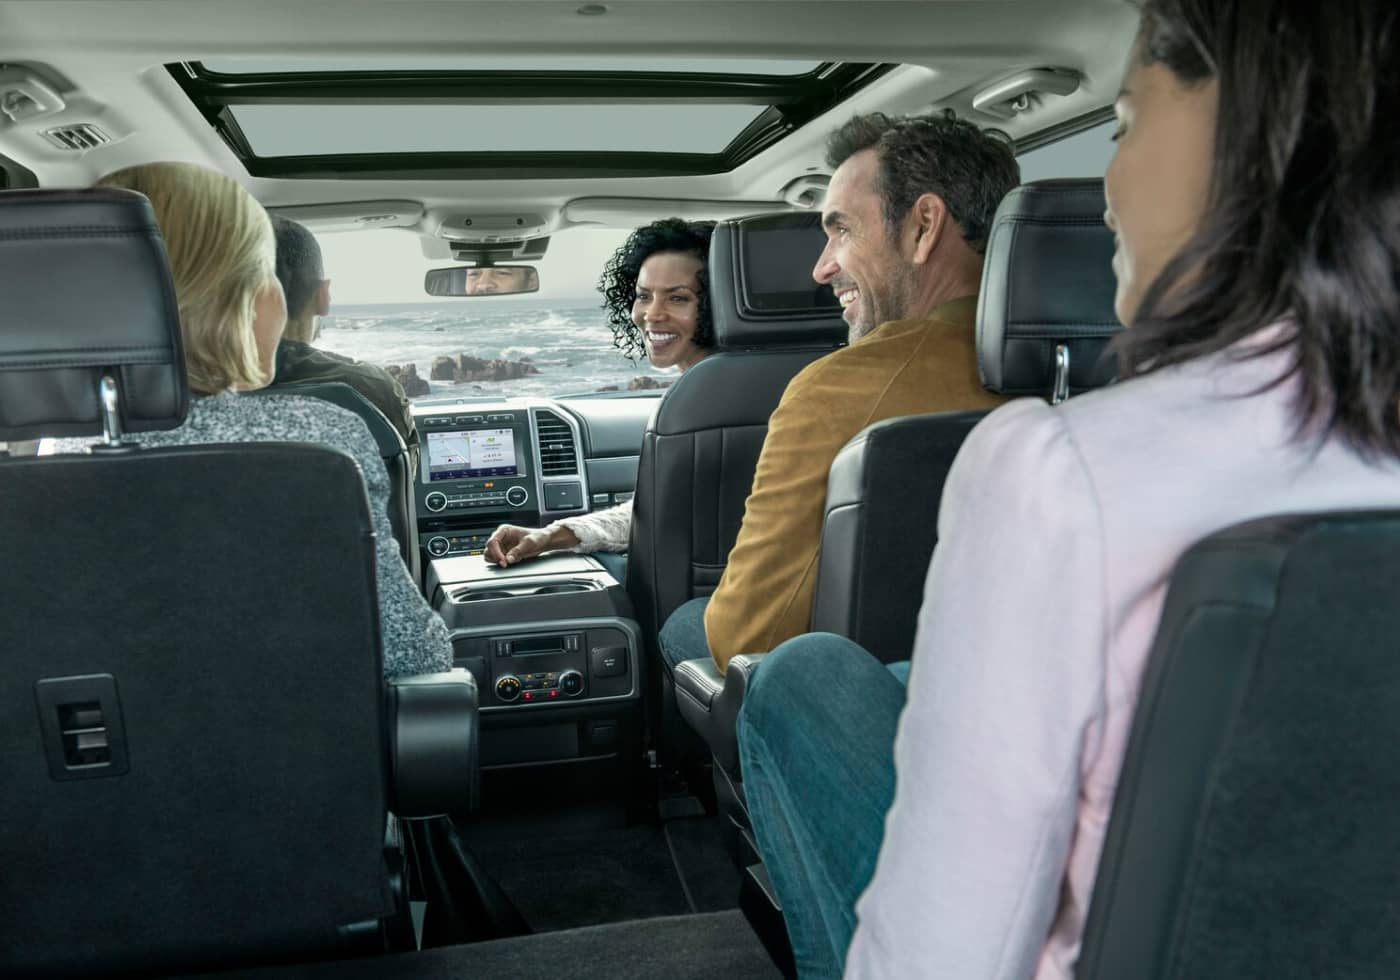 Five people seated in a car, smiling